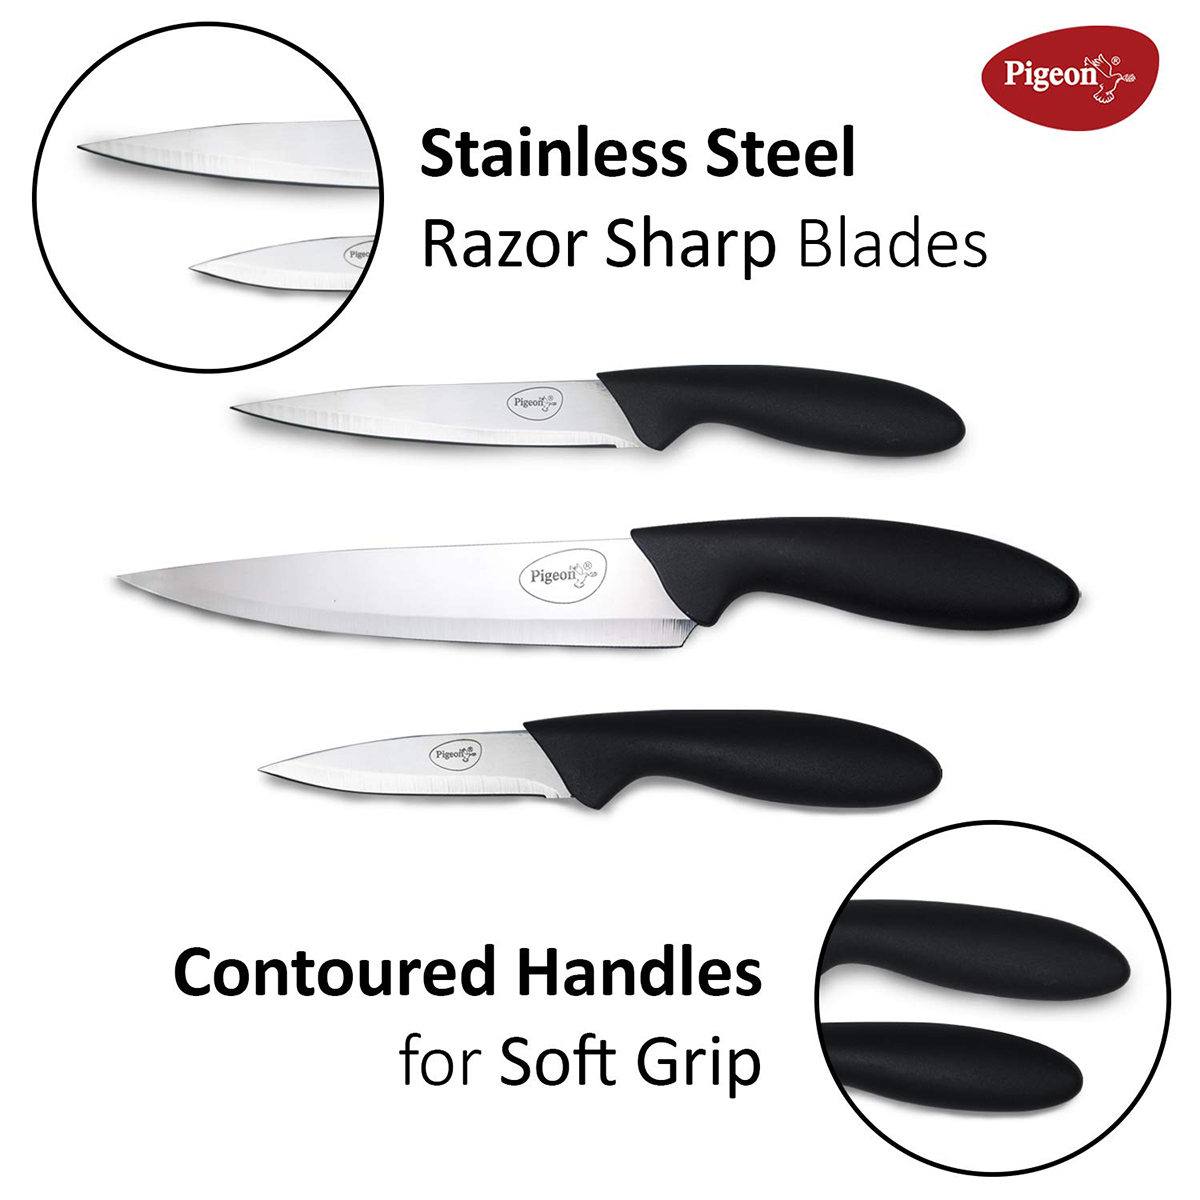 Pigeon Stainless Steel Knife 3Pc Set 15506